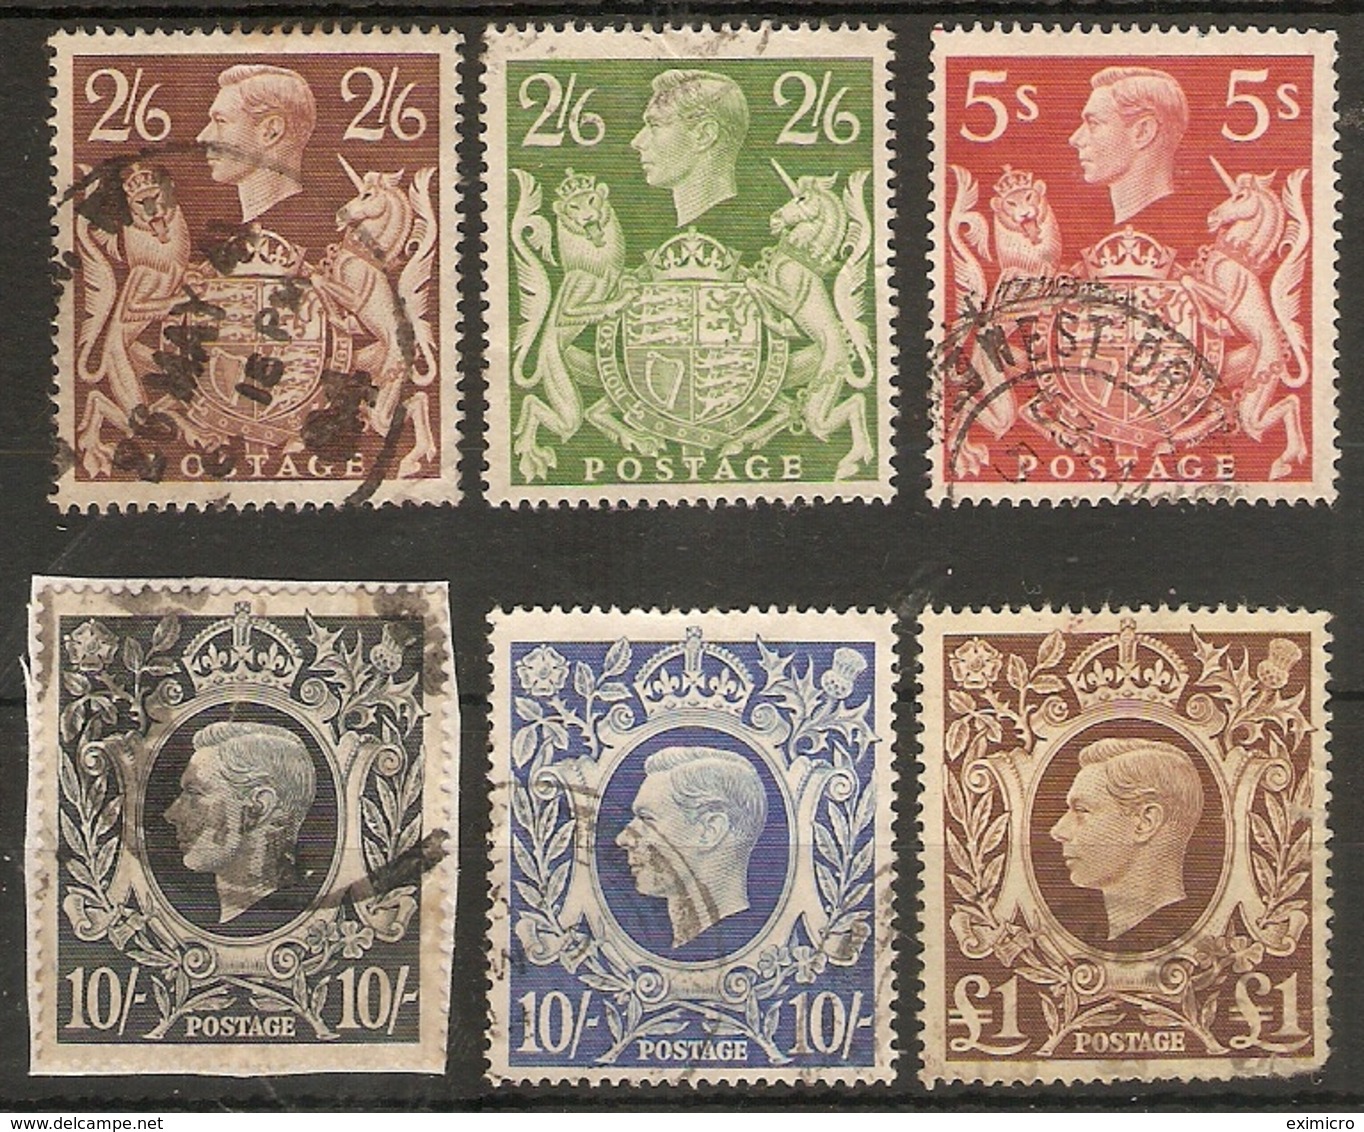 GREAT BRITAIN 1939 - 1948 SET SG 476/478c FINE USED Cat £60 - Used Stamps